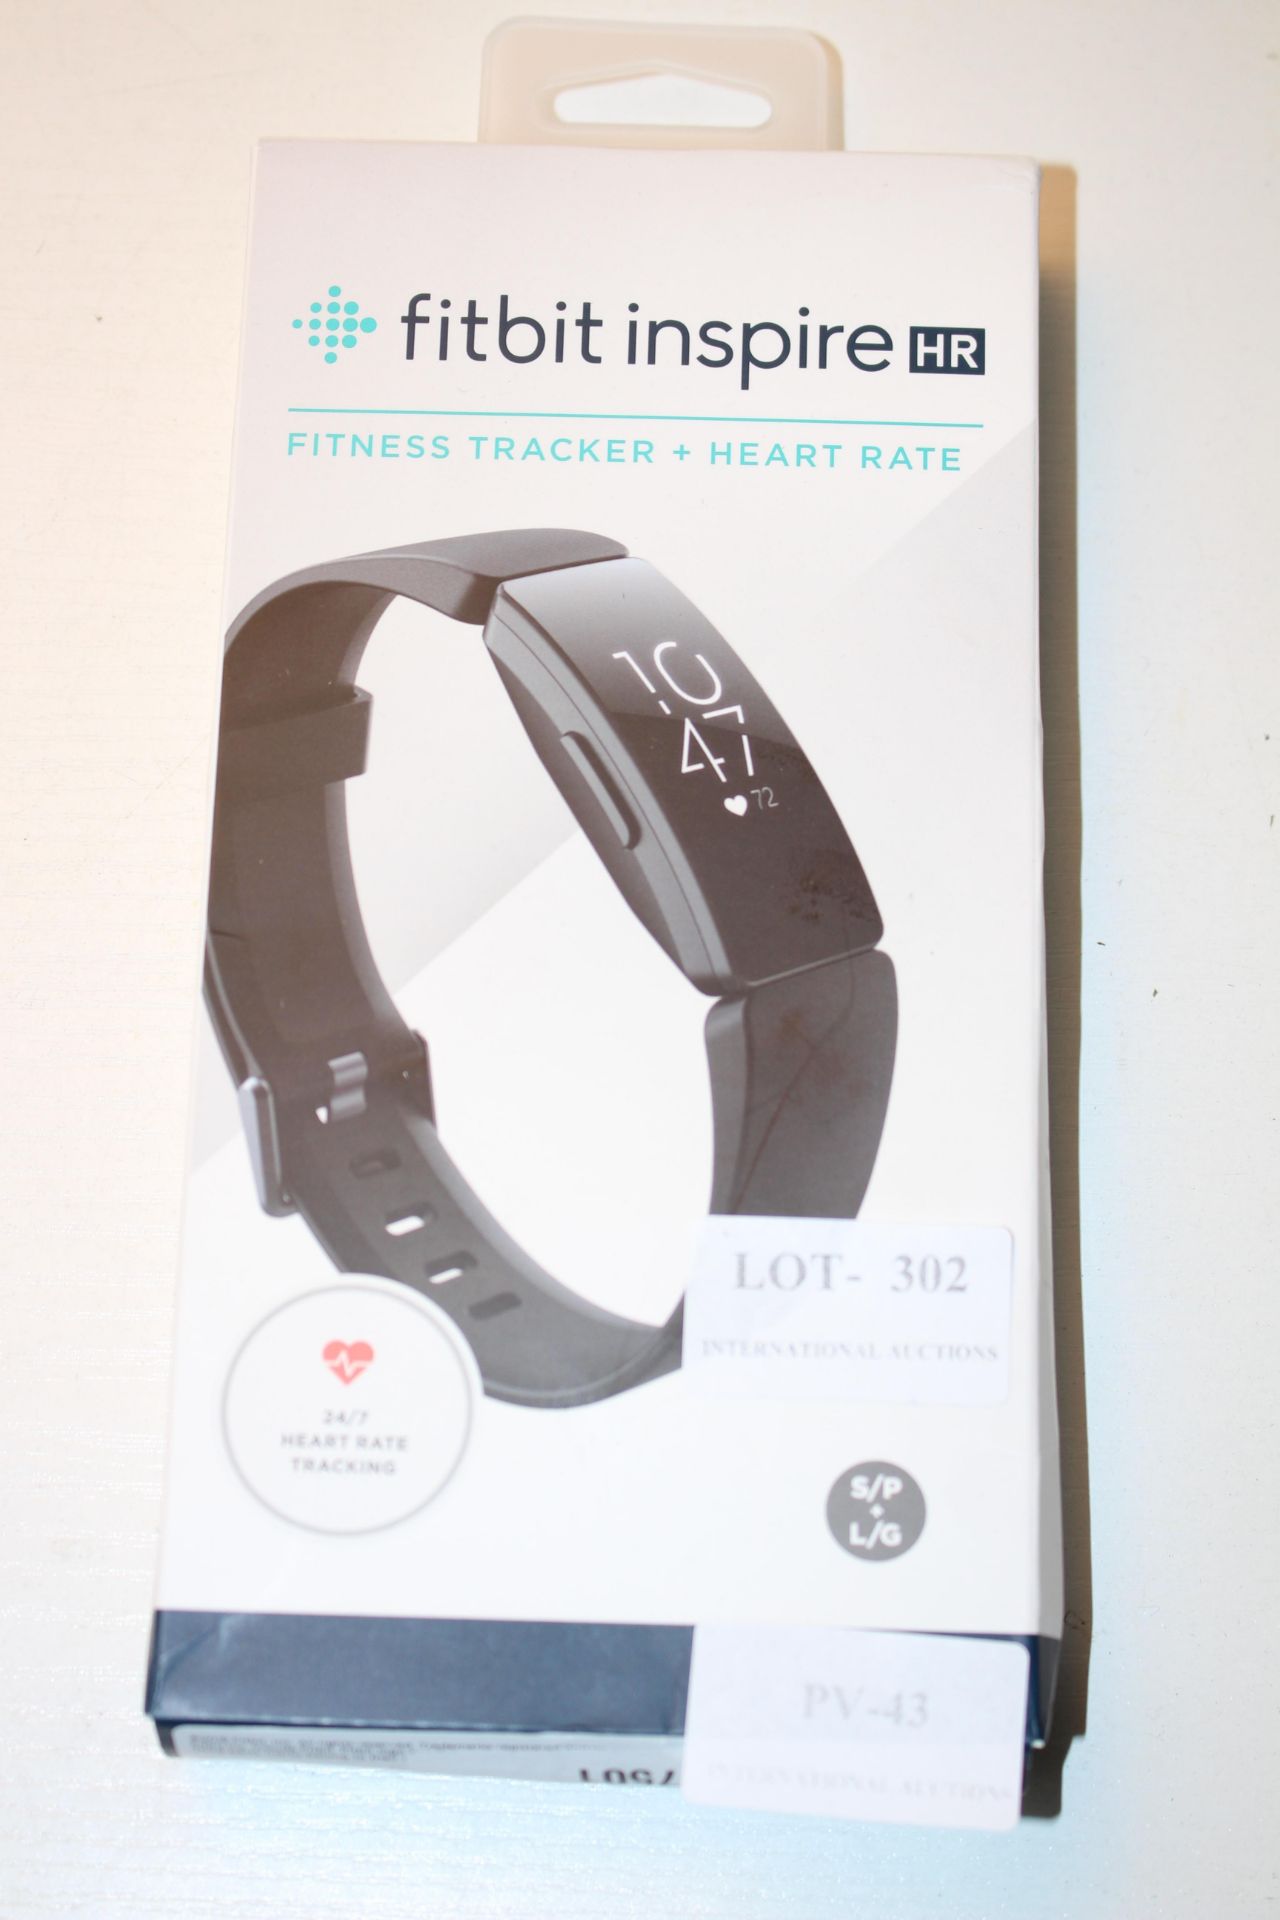 BOXED FITBIT INSPIRE HR FITNESS TRACKER + HEART RATE S/P + L/G RRP £79.99Condition ReportAppraisal